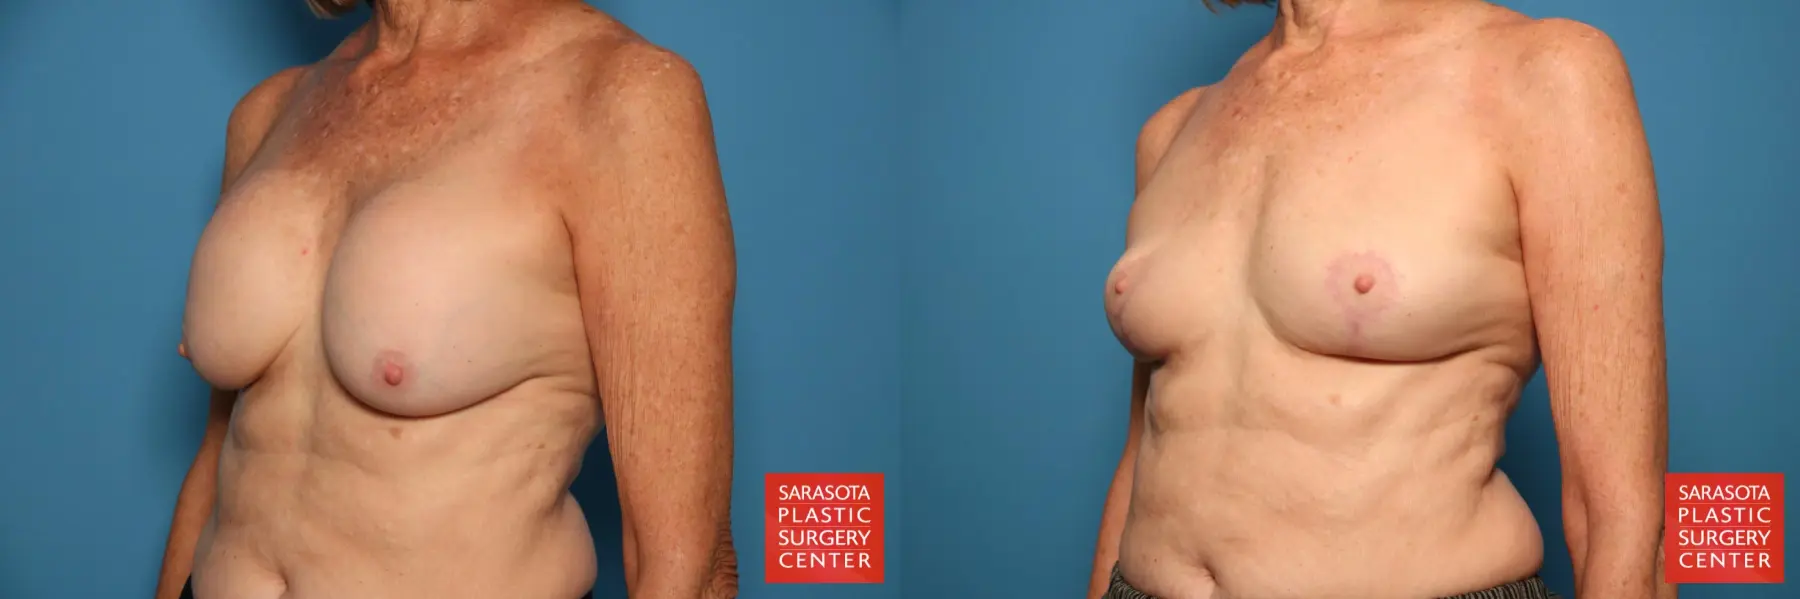 Breast Implant Removal With Lift: Patient 1 - Before and After 2